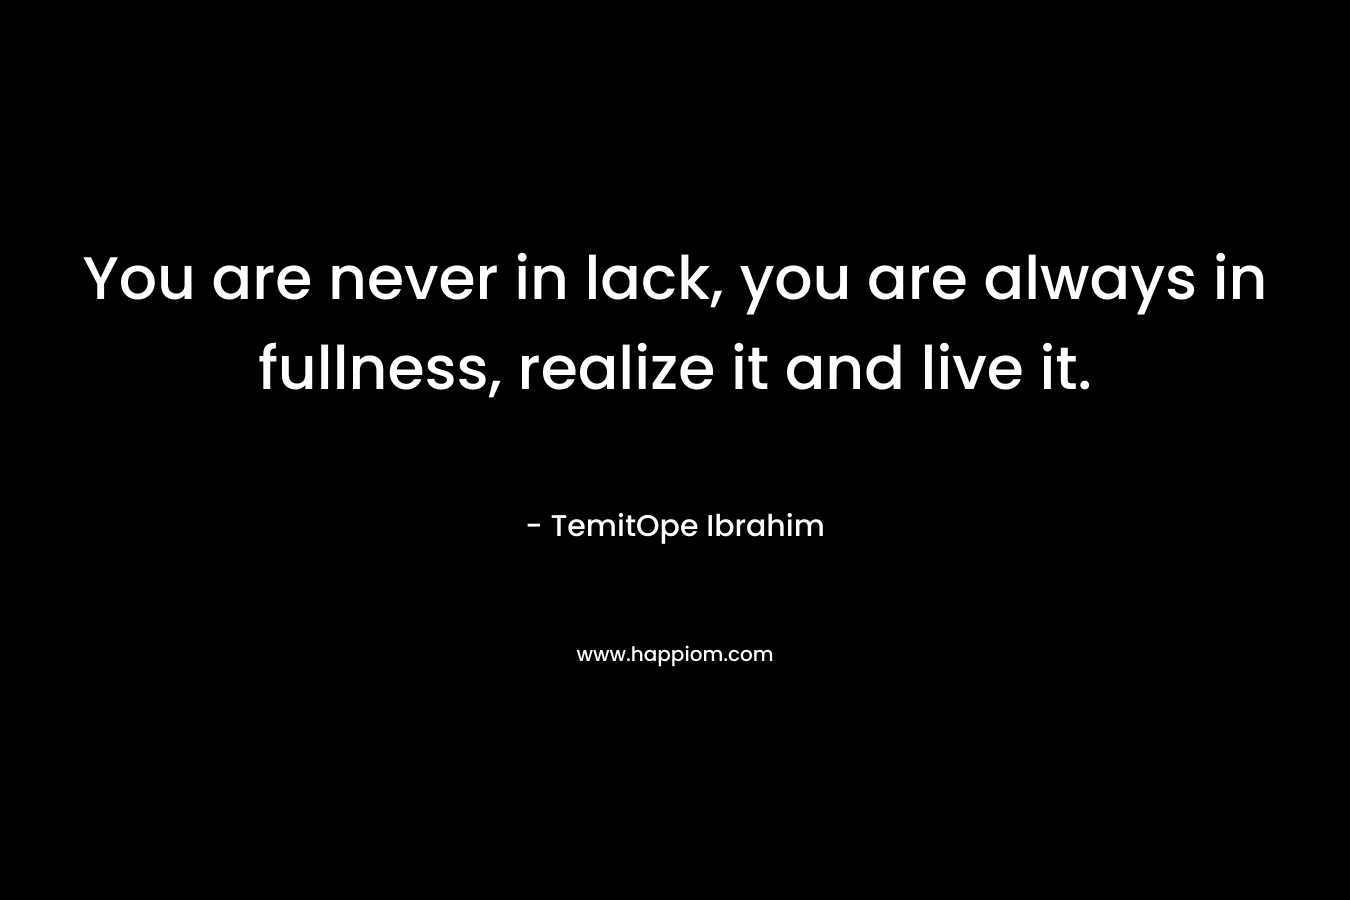 You are never in lack, you are always in fullness, realize it and live it.